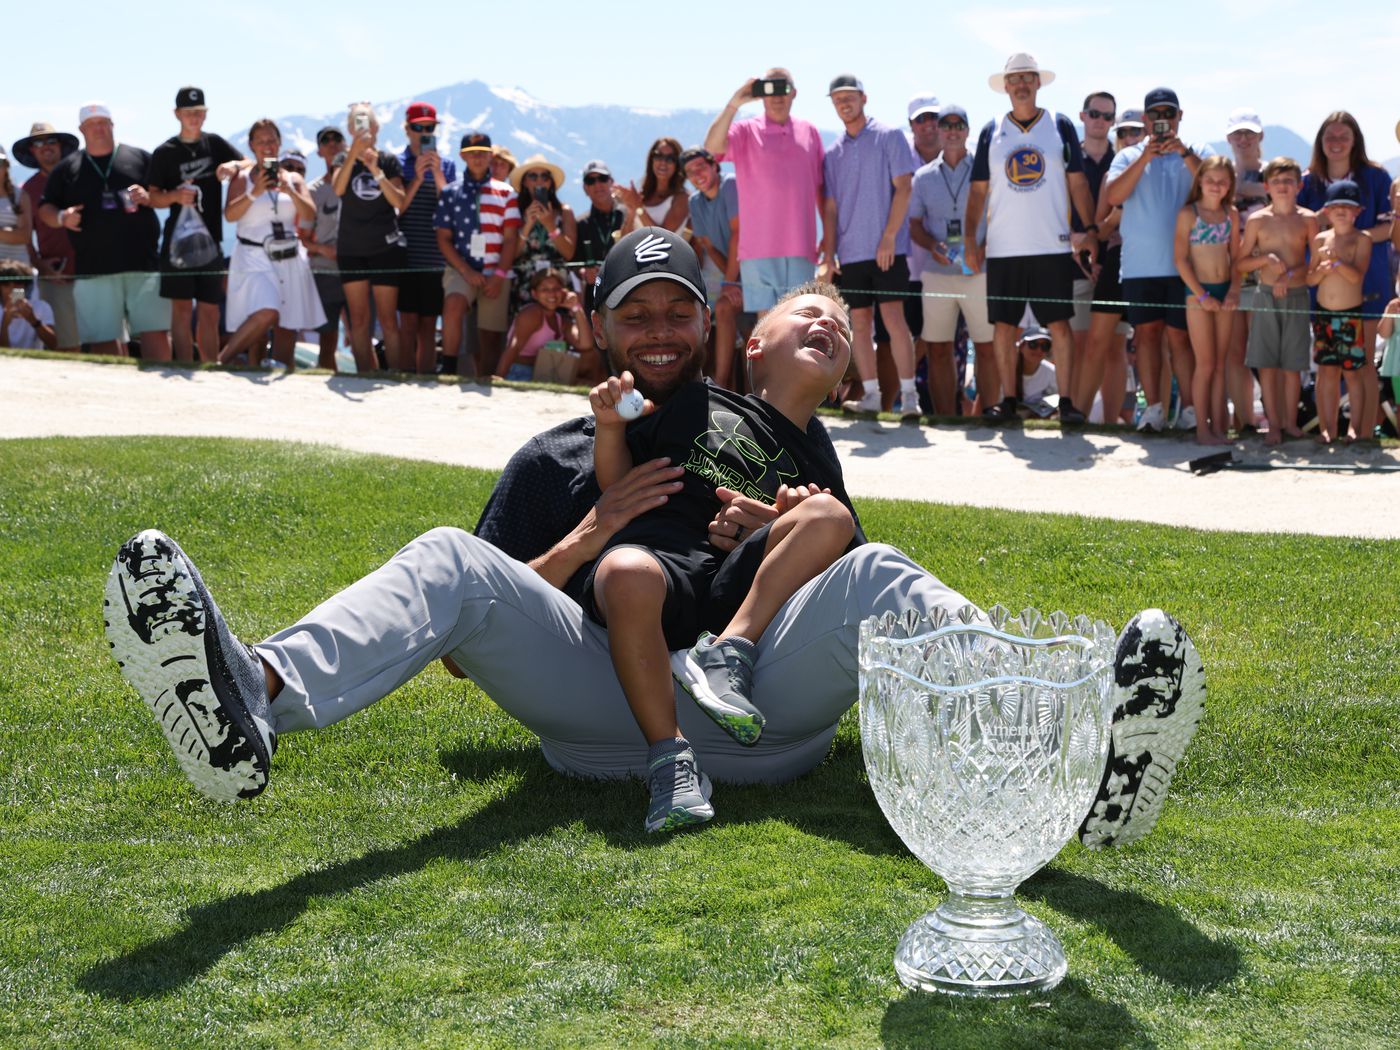 likhoa stephen curry s victory at the celebrity golf tournament this weekend a heartwarming celebration with son canon 652223b9835a0 Stephen Curry's Victory At The Celebrity Golf Tournament This Weekend: A Heartwarming Celebration With Son Canon